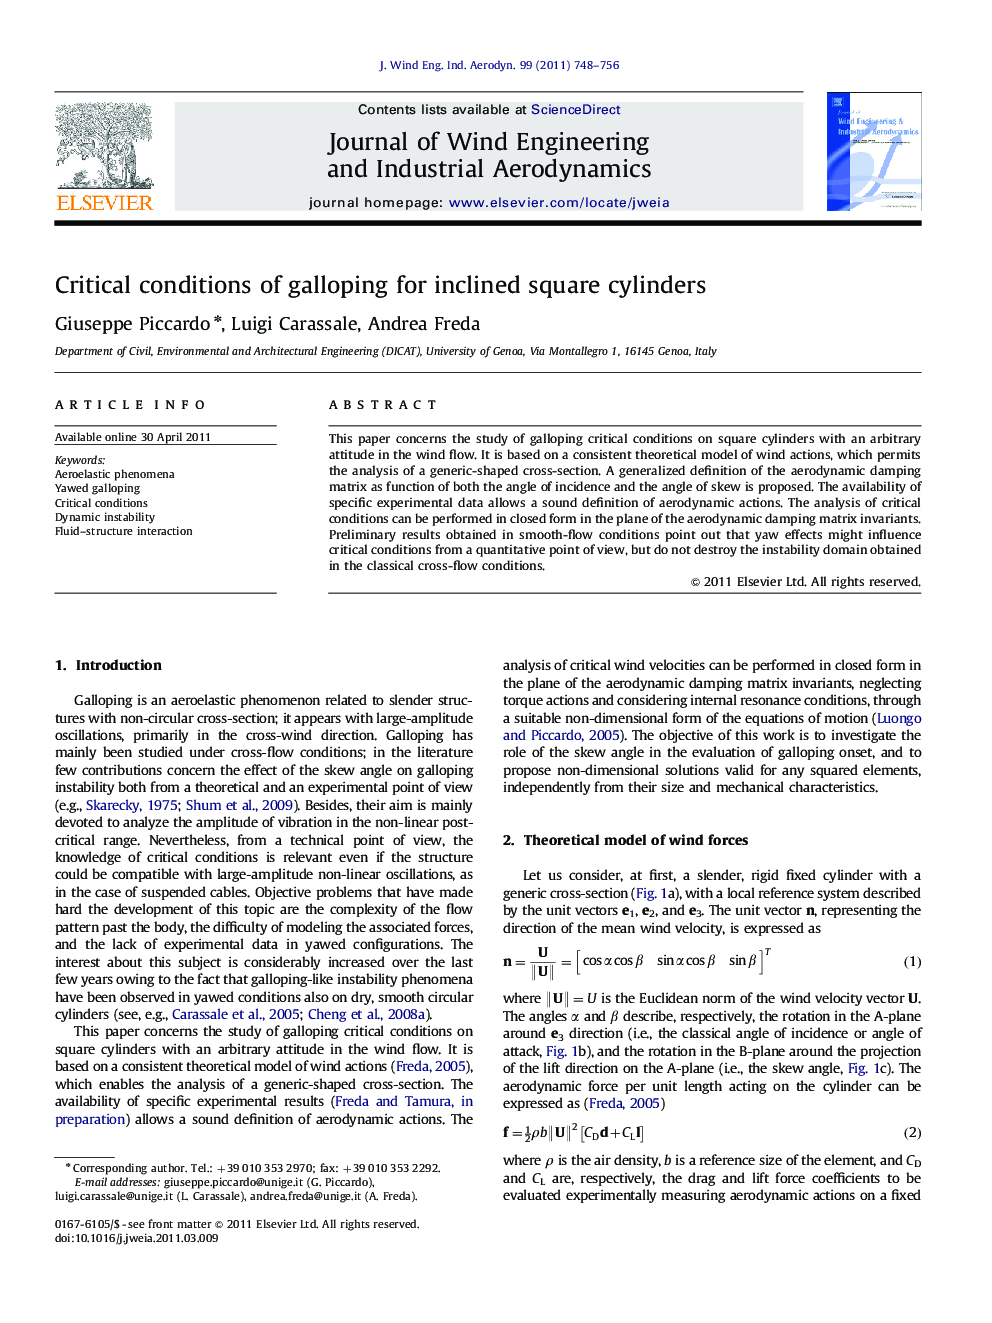 Critical conditions of galloping for inclined square cylinders